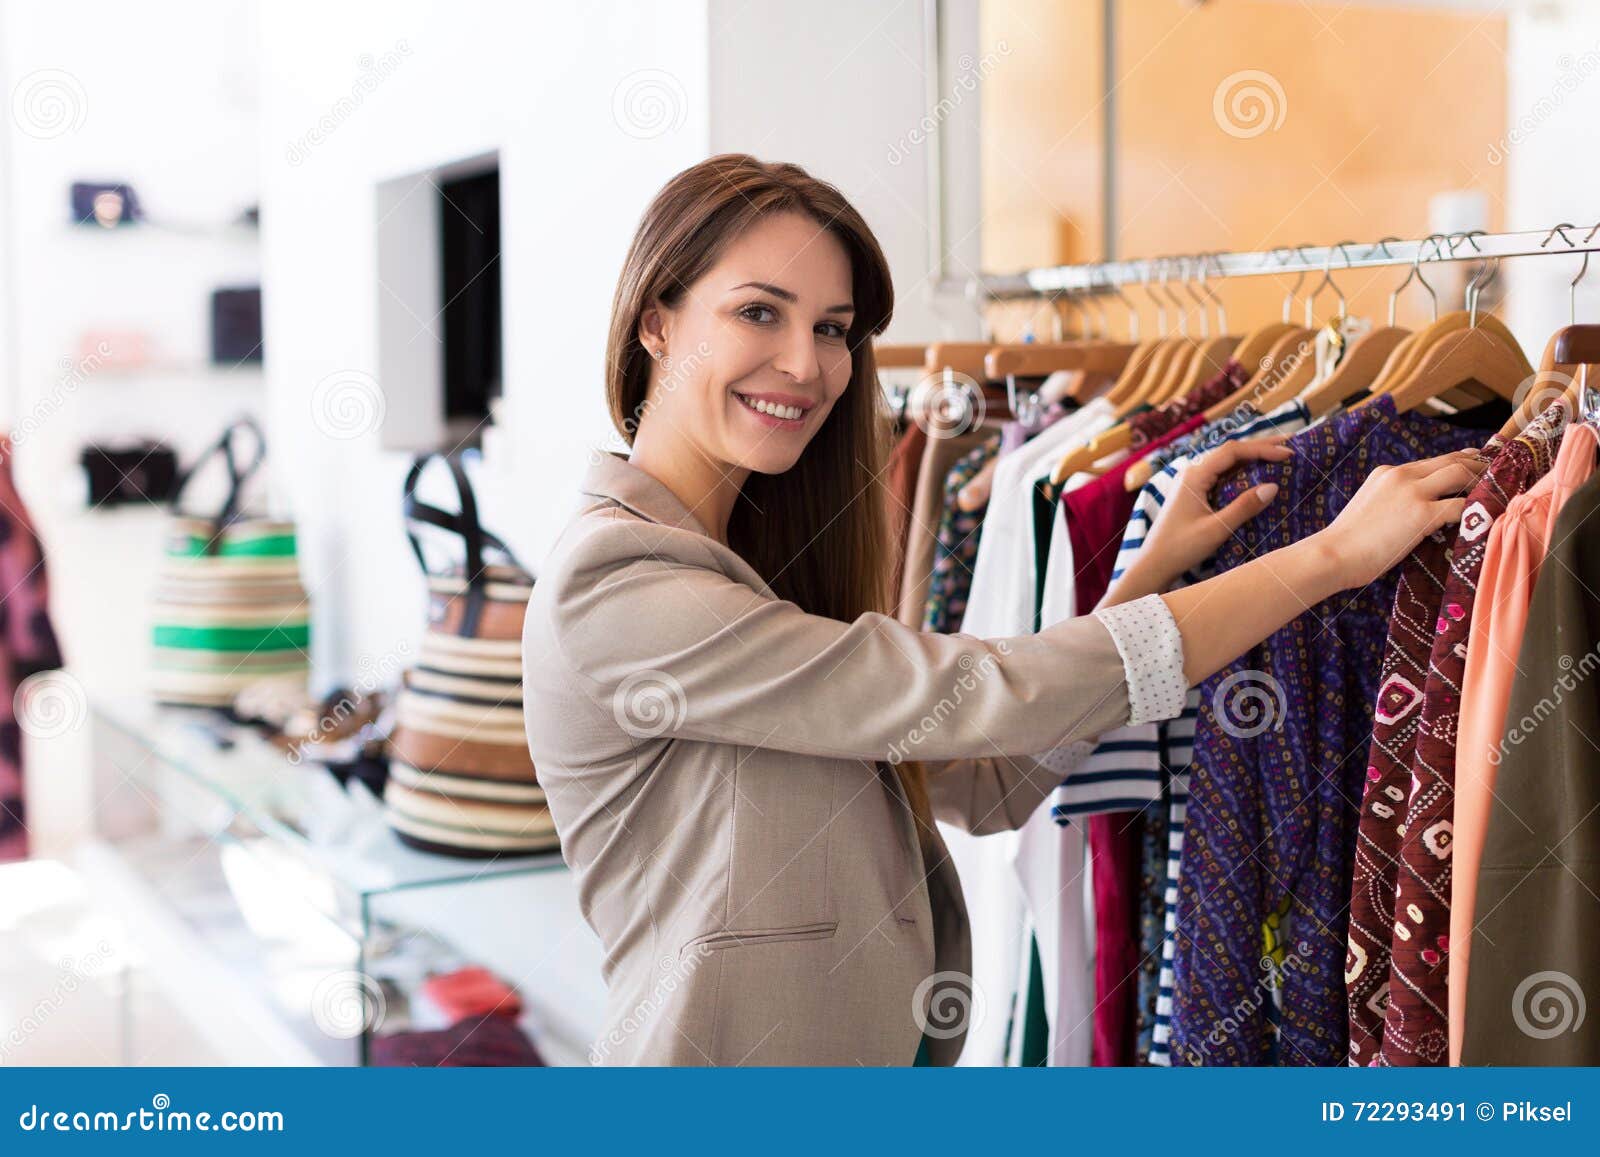 Woman Shopping in a Boutique Stock Image - Image of occupation ...